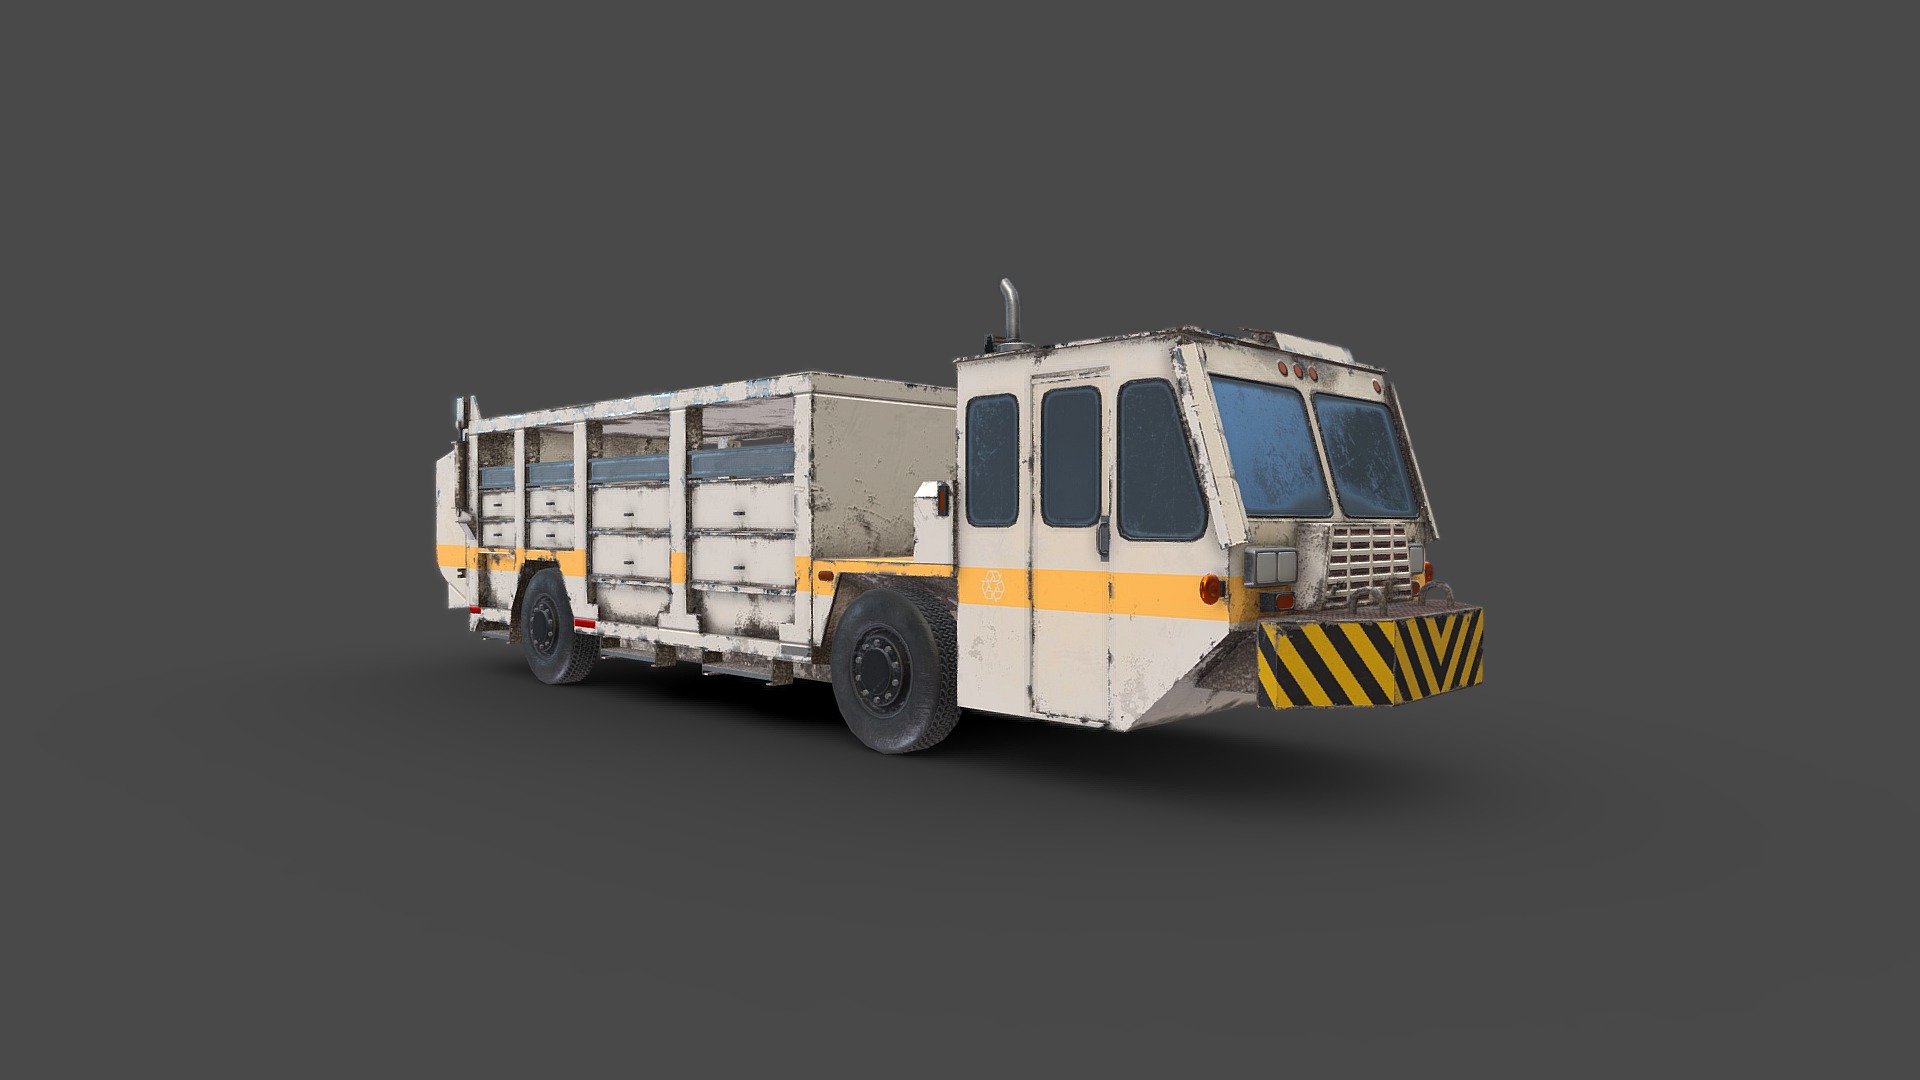 3D model 1980s Refuse Collection Truck - This is a 3D model of the 1980s Refuse Collection Truck. The 3D model is about a white truck with a yellow stripe.